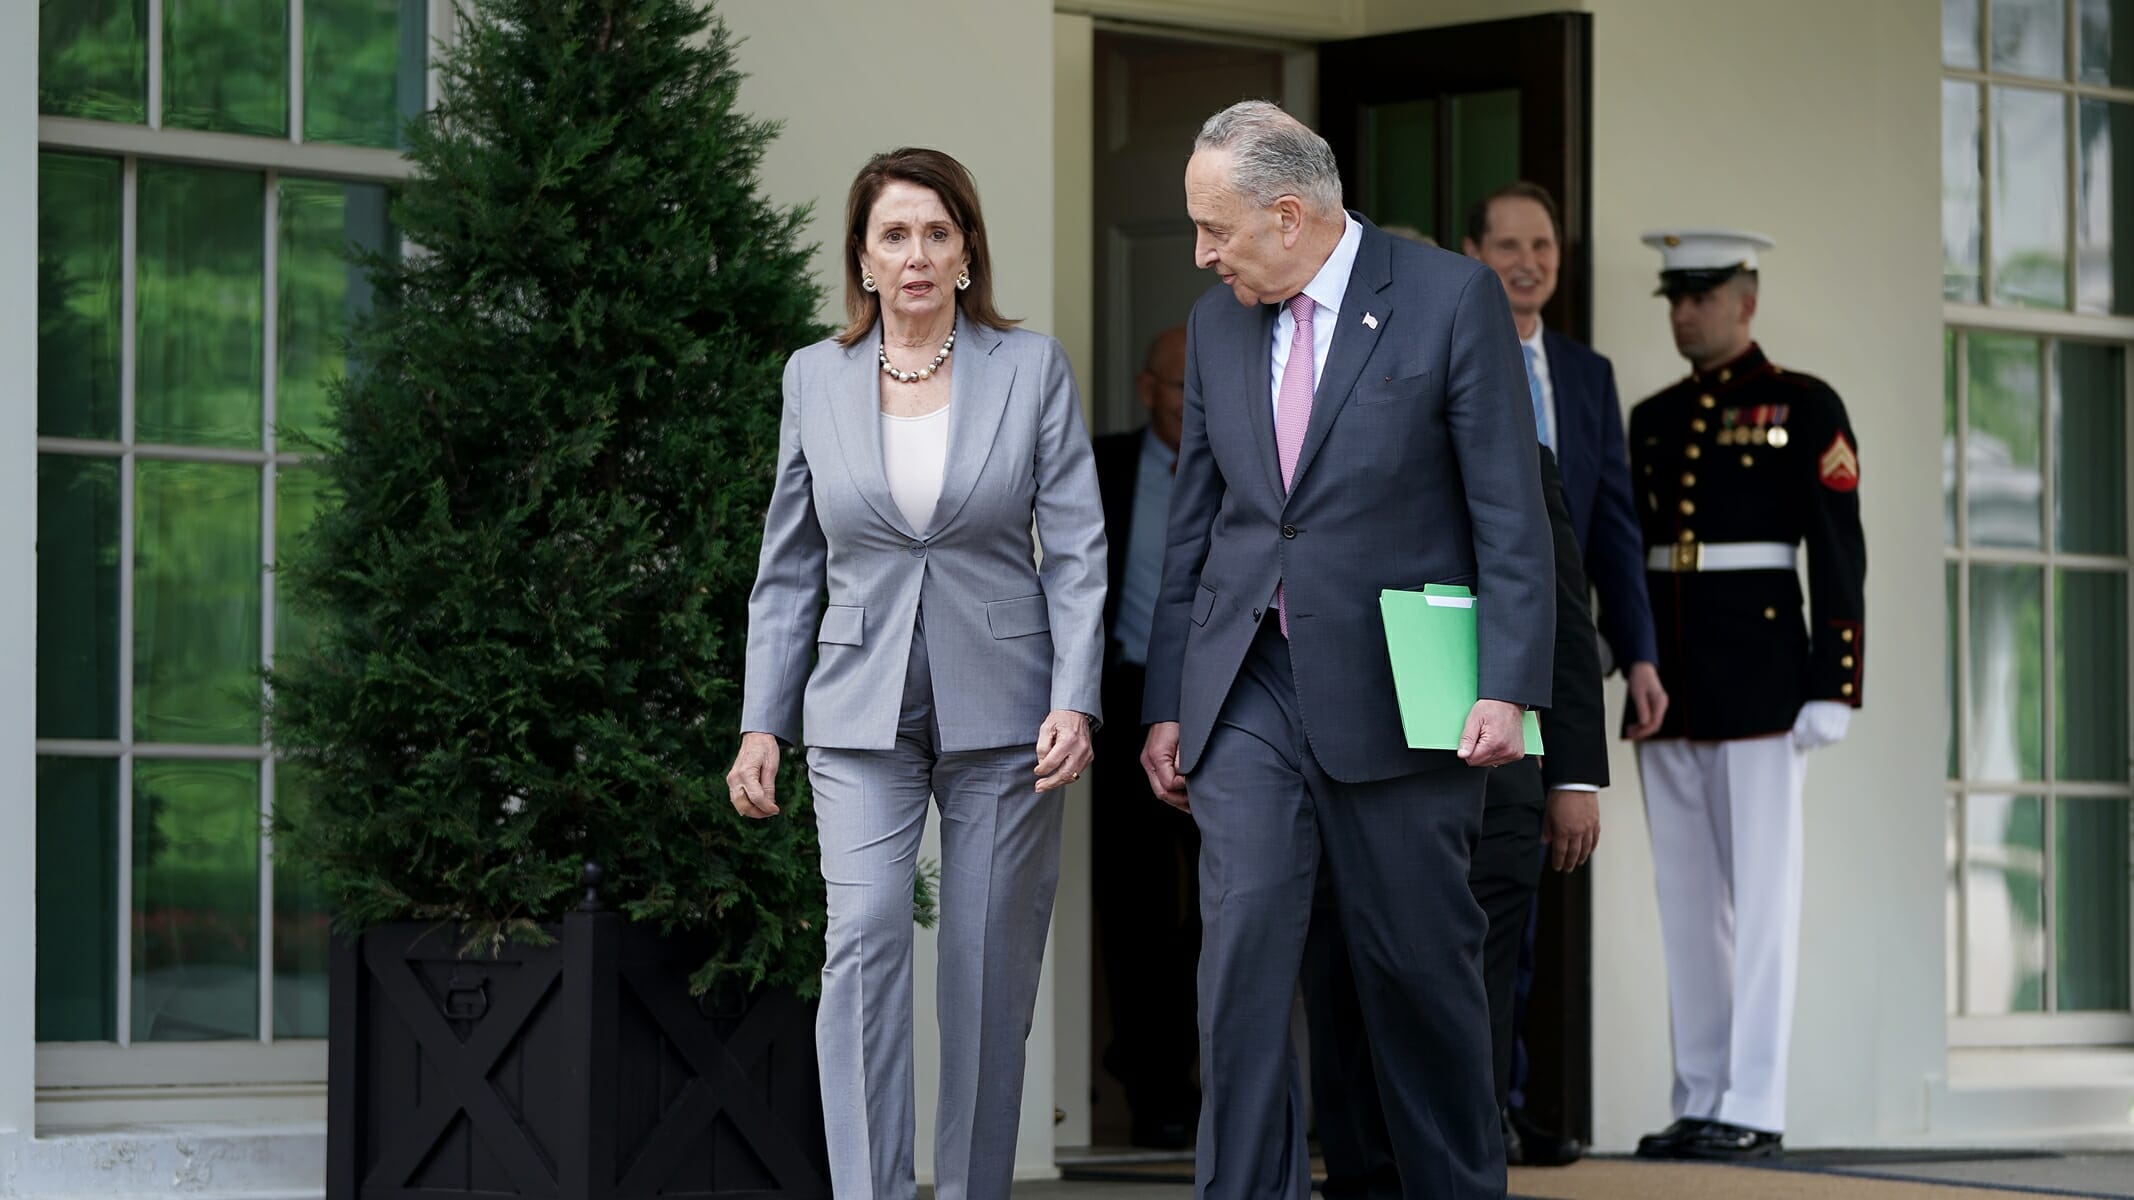 Two Theories on What Pelosi and Schumer Are Really Doing with Trump on Infrastructure